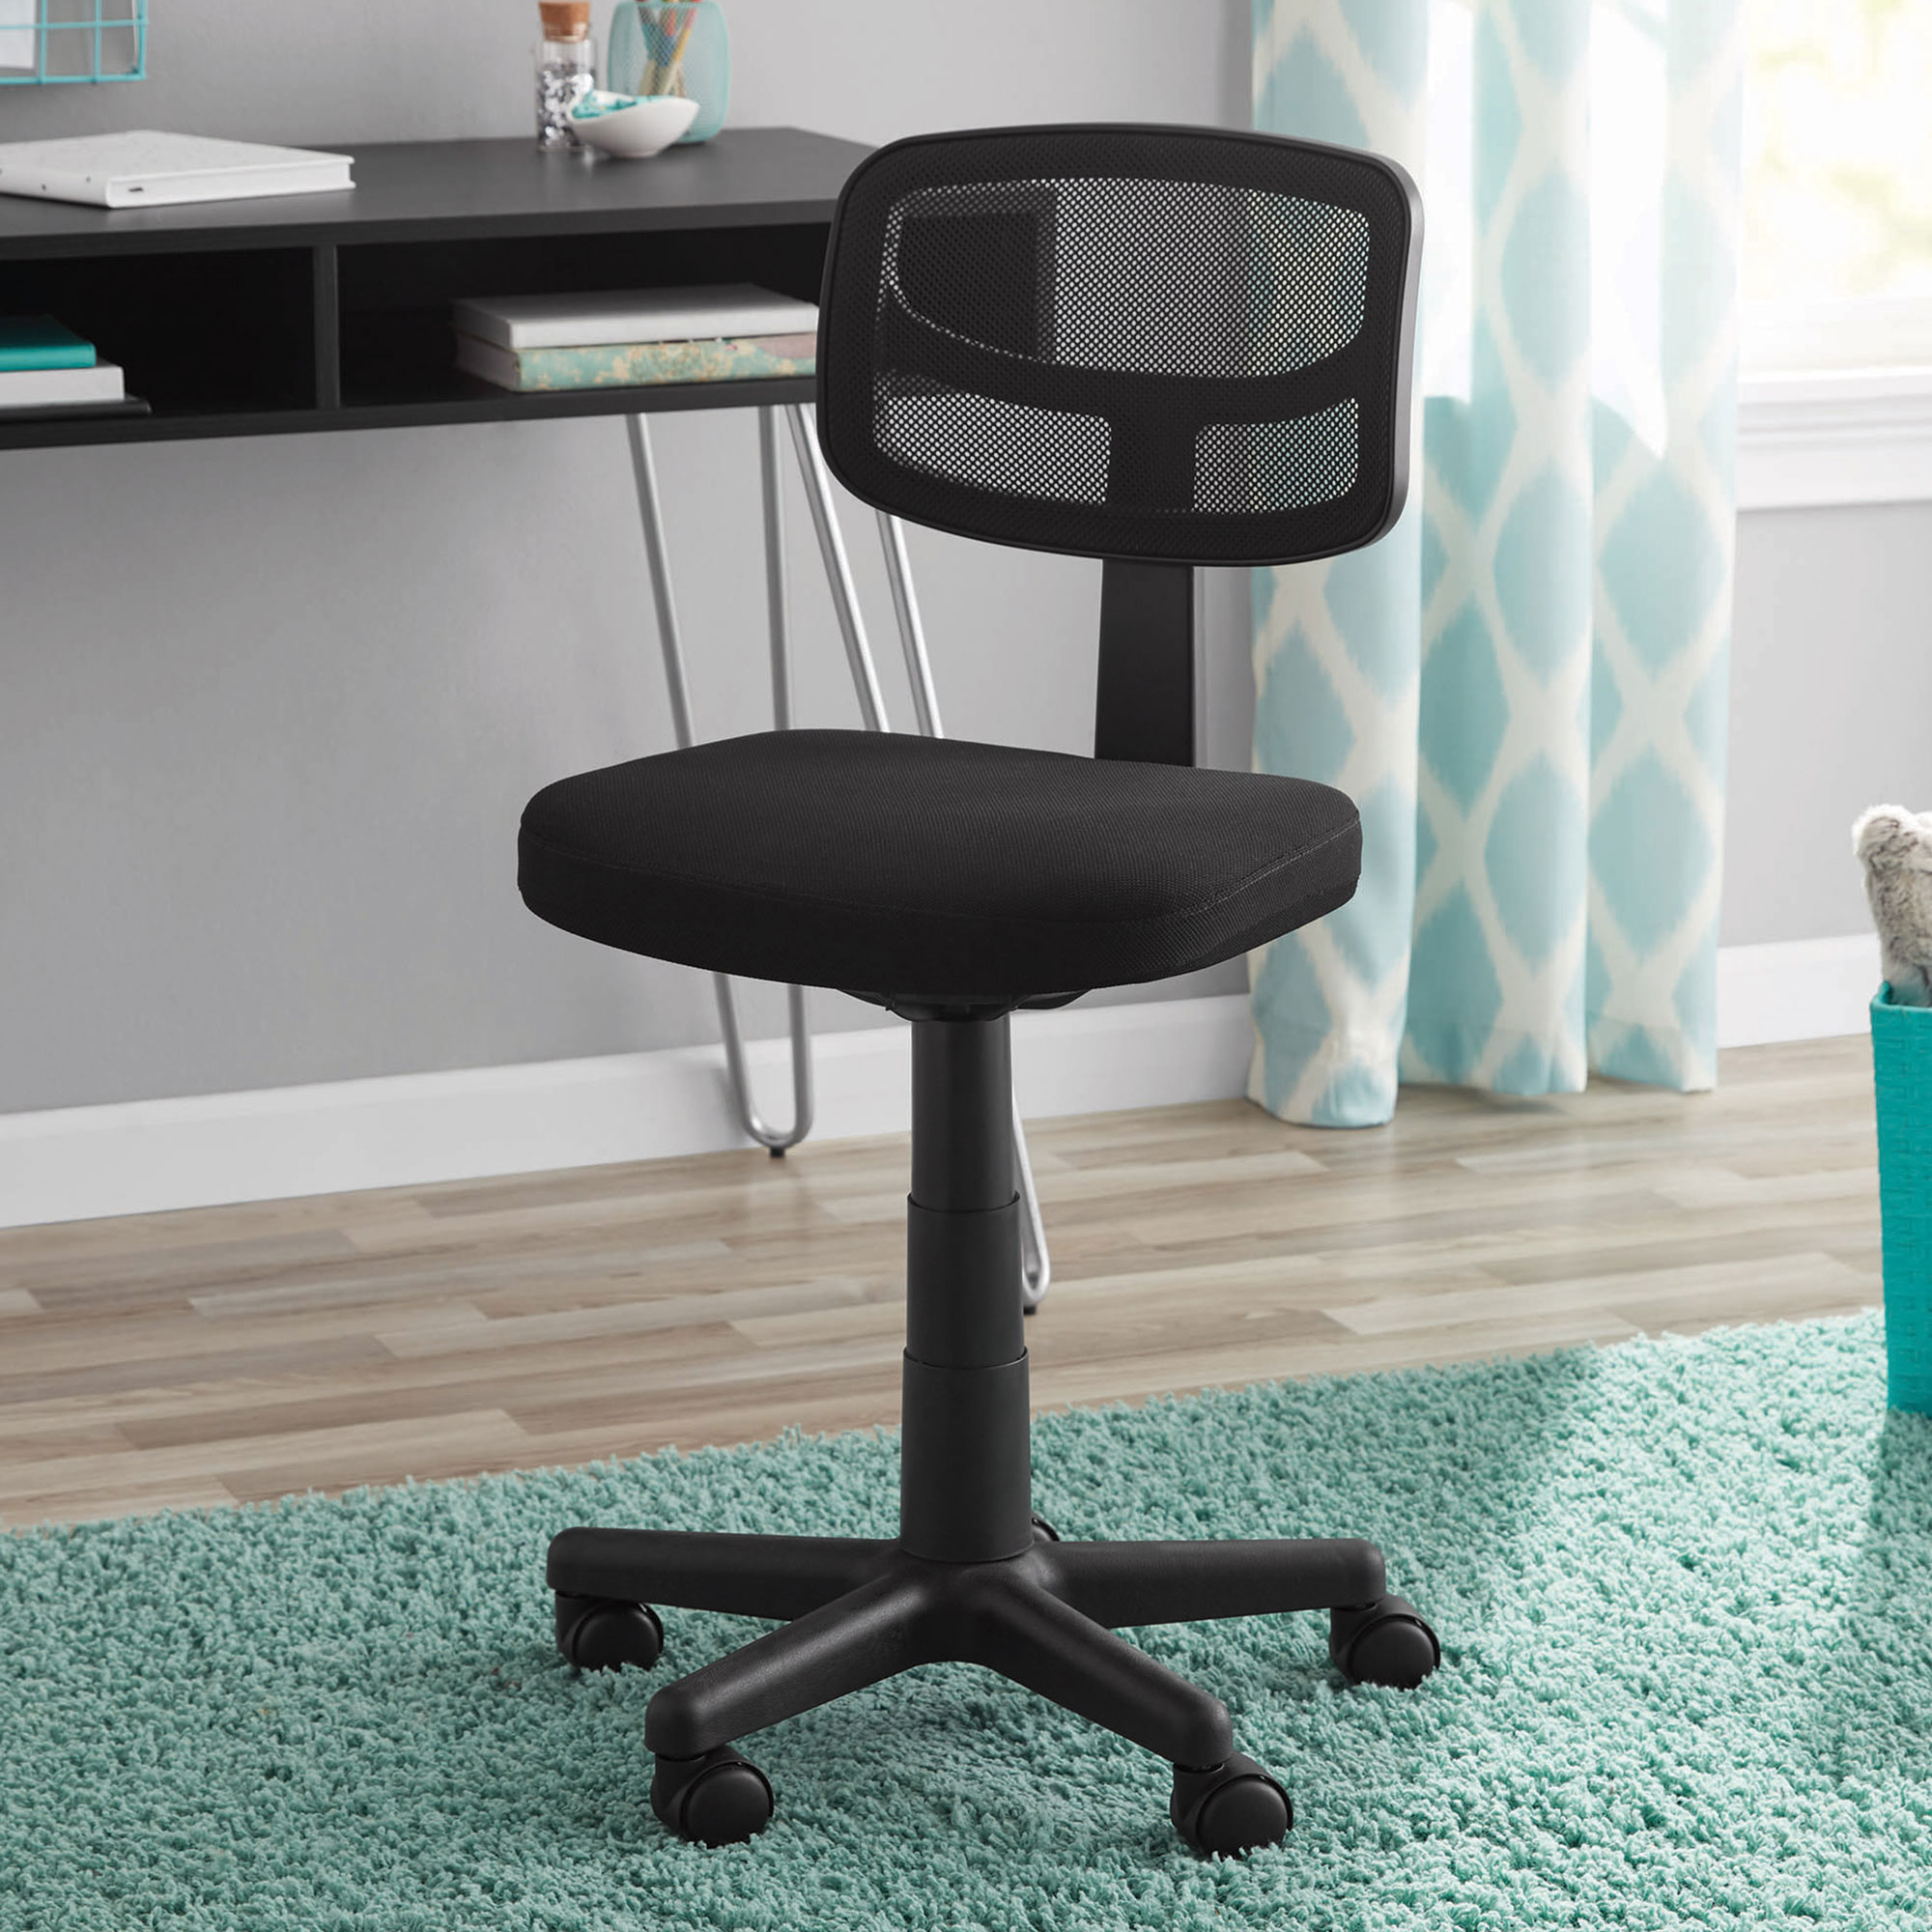 Mainstays Mesh Task Chair with Plush Padded Seat椅子